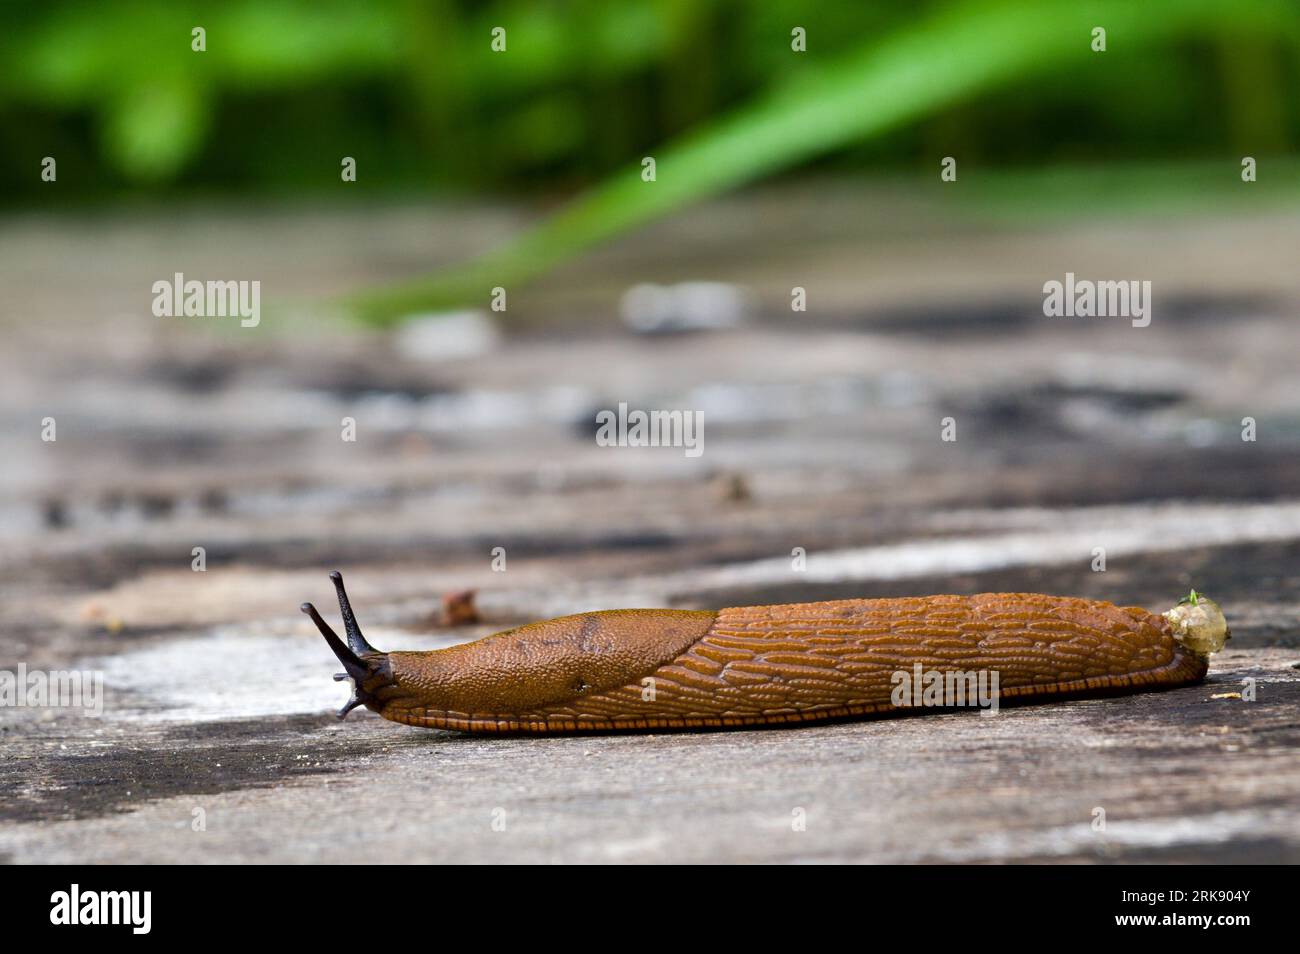 Arion Vulgaris aka Spanish slug. The most Invading animal in Europe and the biggest enemy of every gardener. Czech republic nature. Stock Photo